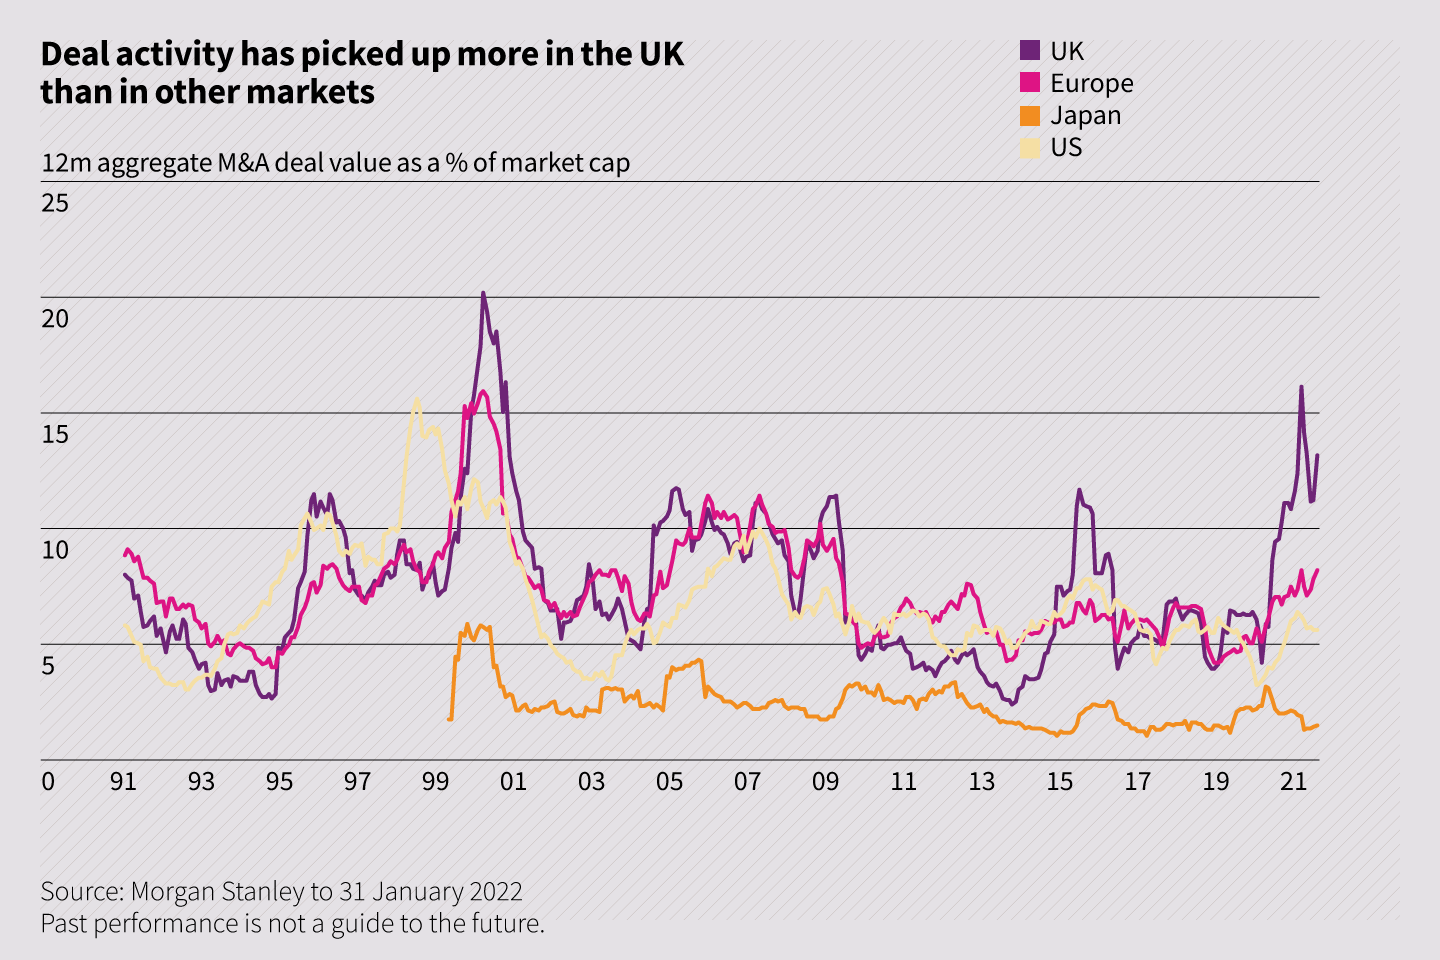 Deal activity has picked up more in the UK than in other markets